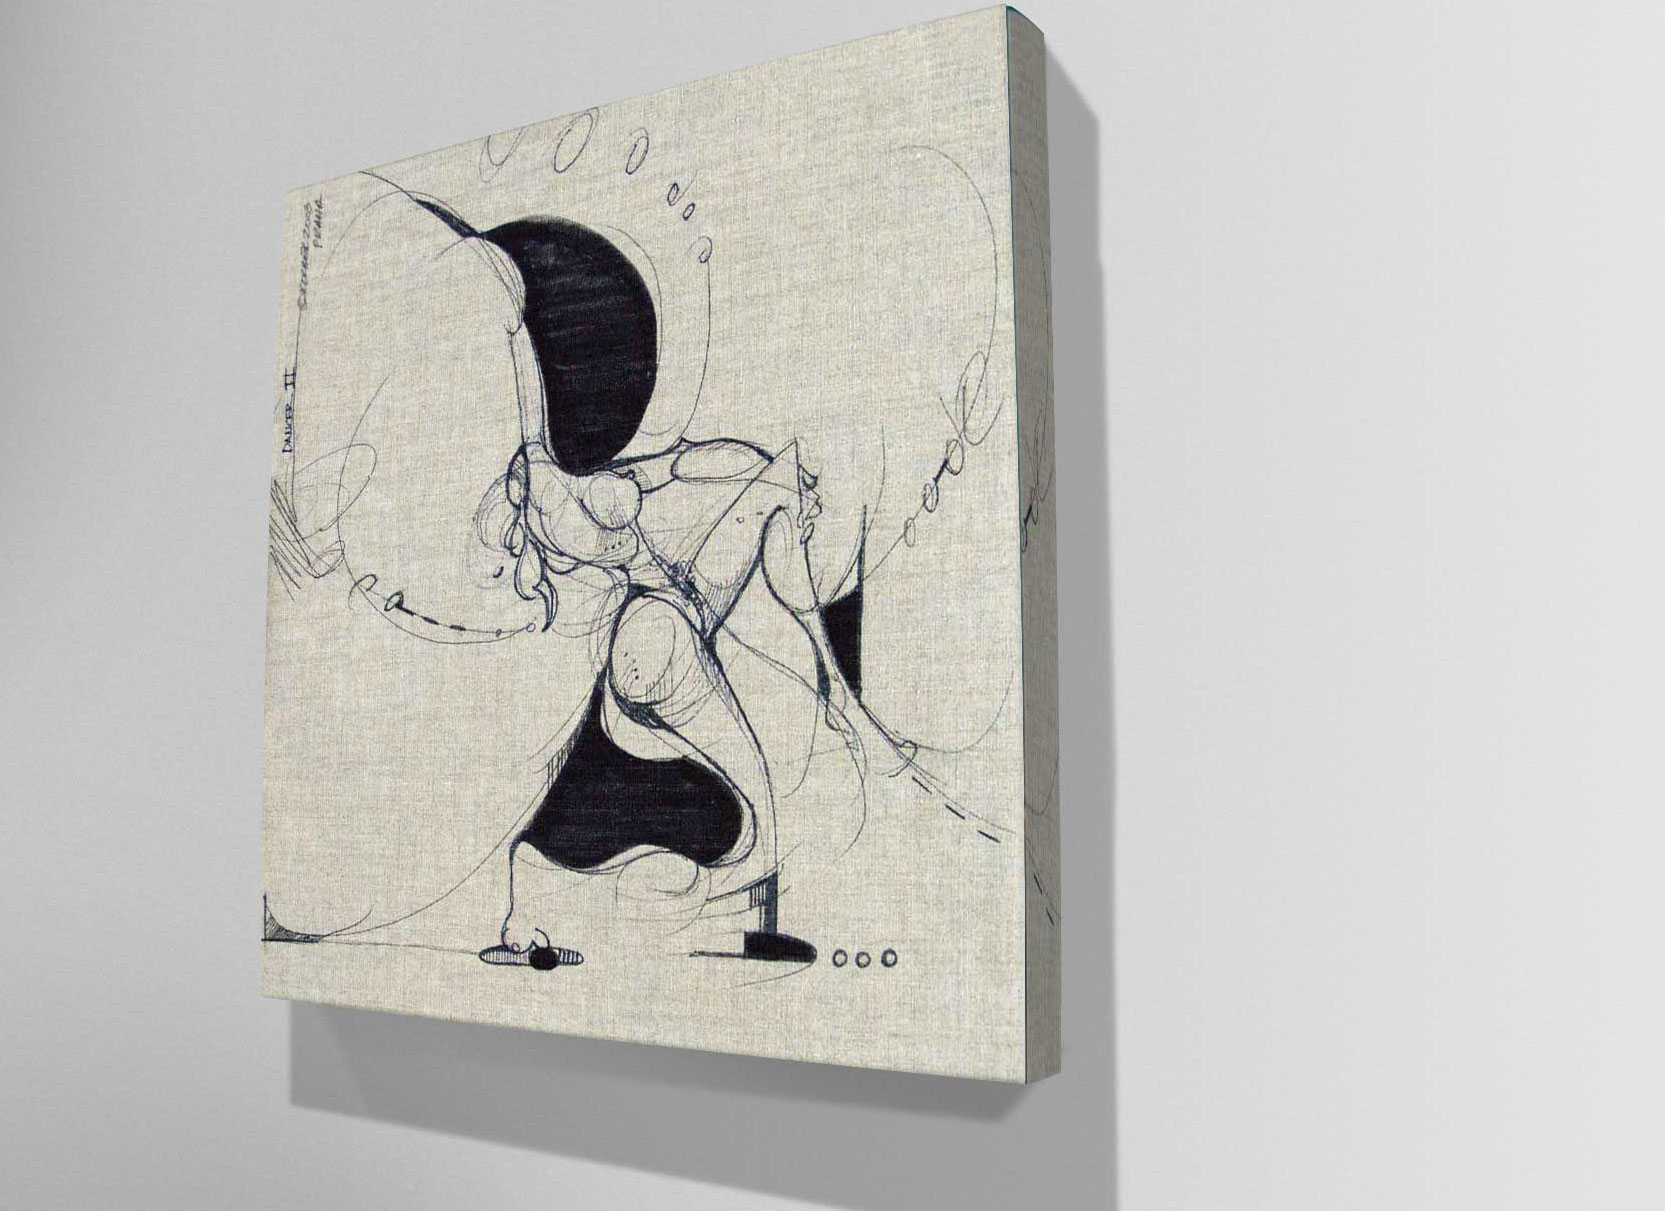 Photo of a drawing titled Dancer in line by artist Michael J. Korber in the medium of ink on raw linen in the Centre Culturel Christiane Peugeot in Paris, France